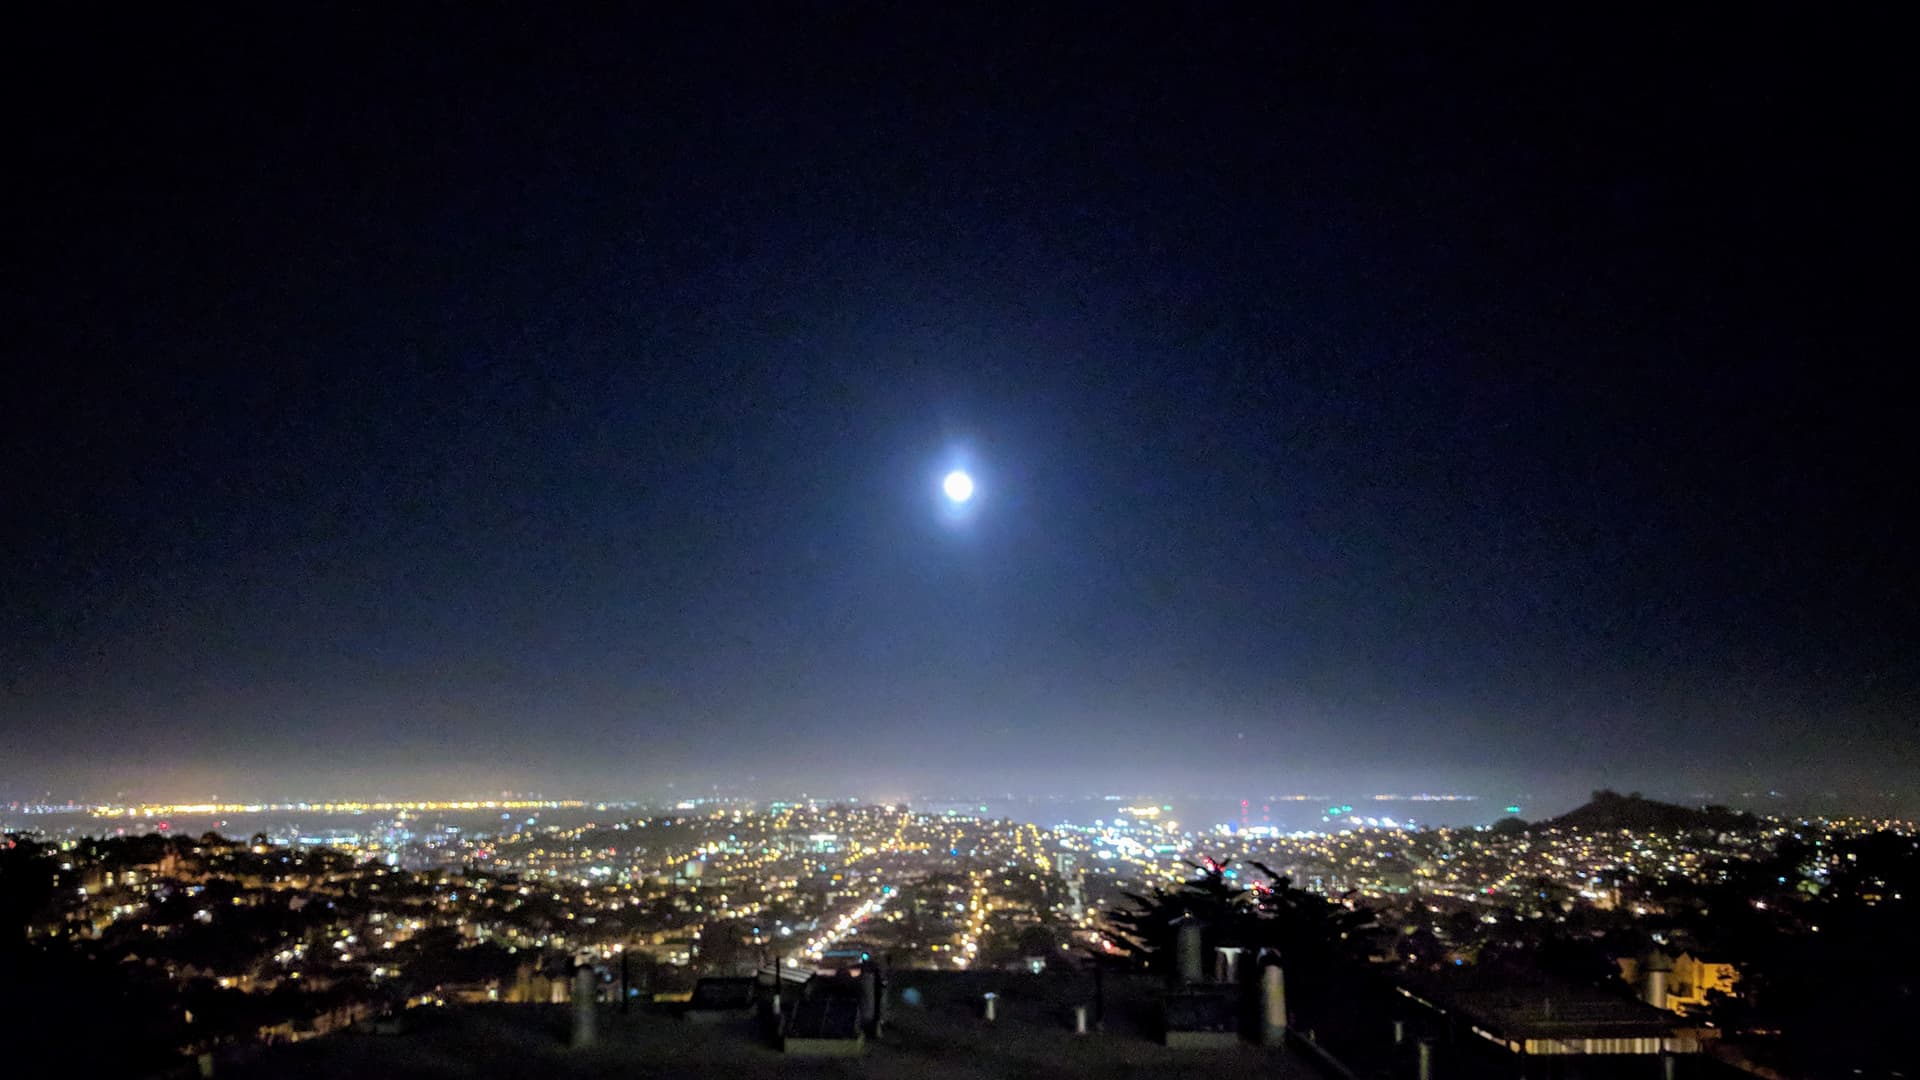 Looking east across San Francisco at night. The Moon is high in the sky, and the other side of San Francisco Bay can just be seen on the horizon.